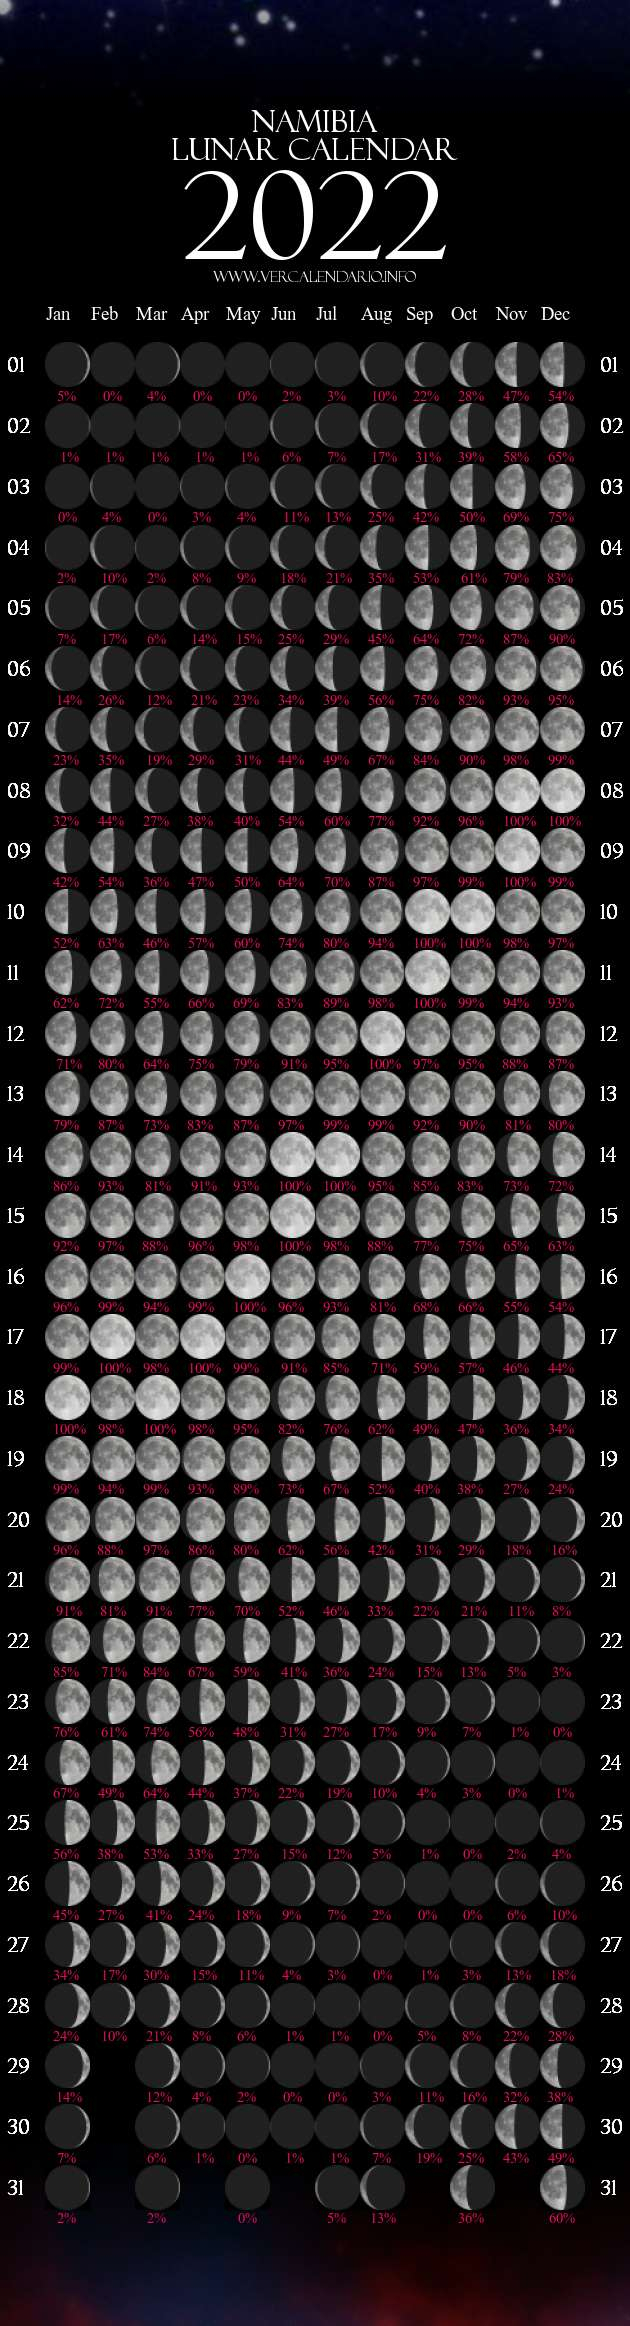 Phases Of The Moon Calendar 2022 Sabah